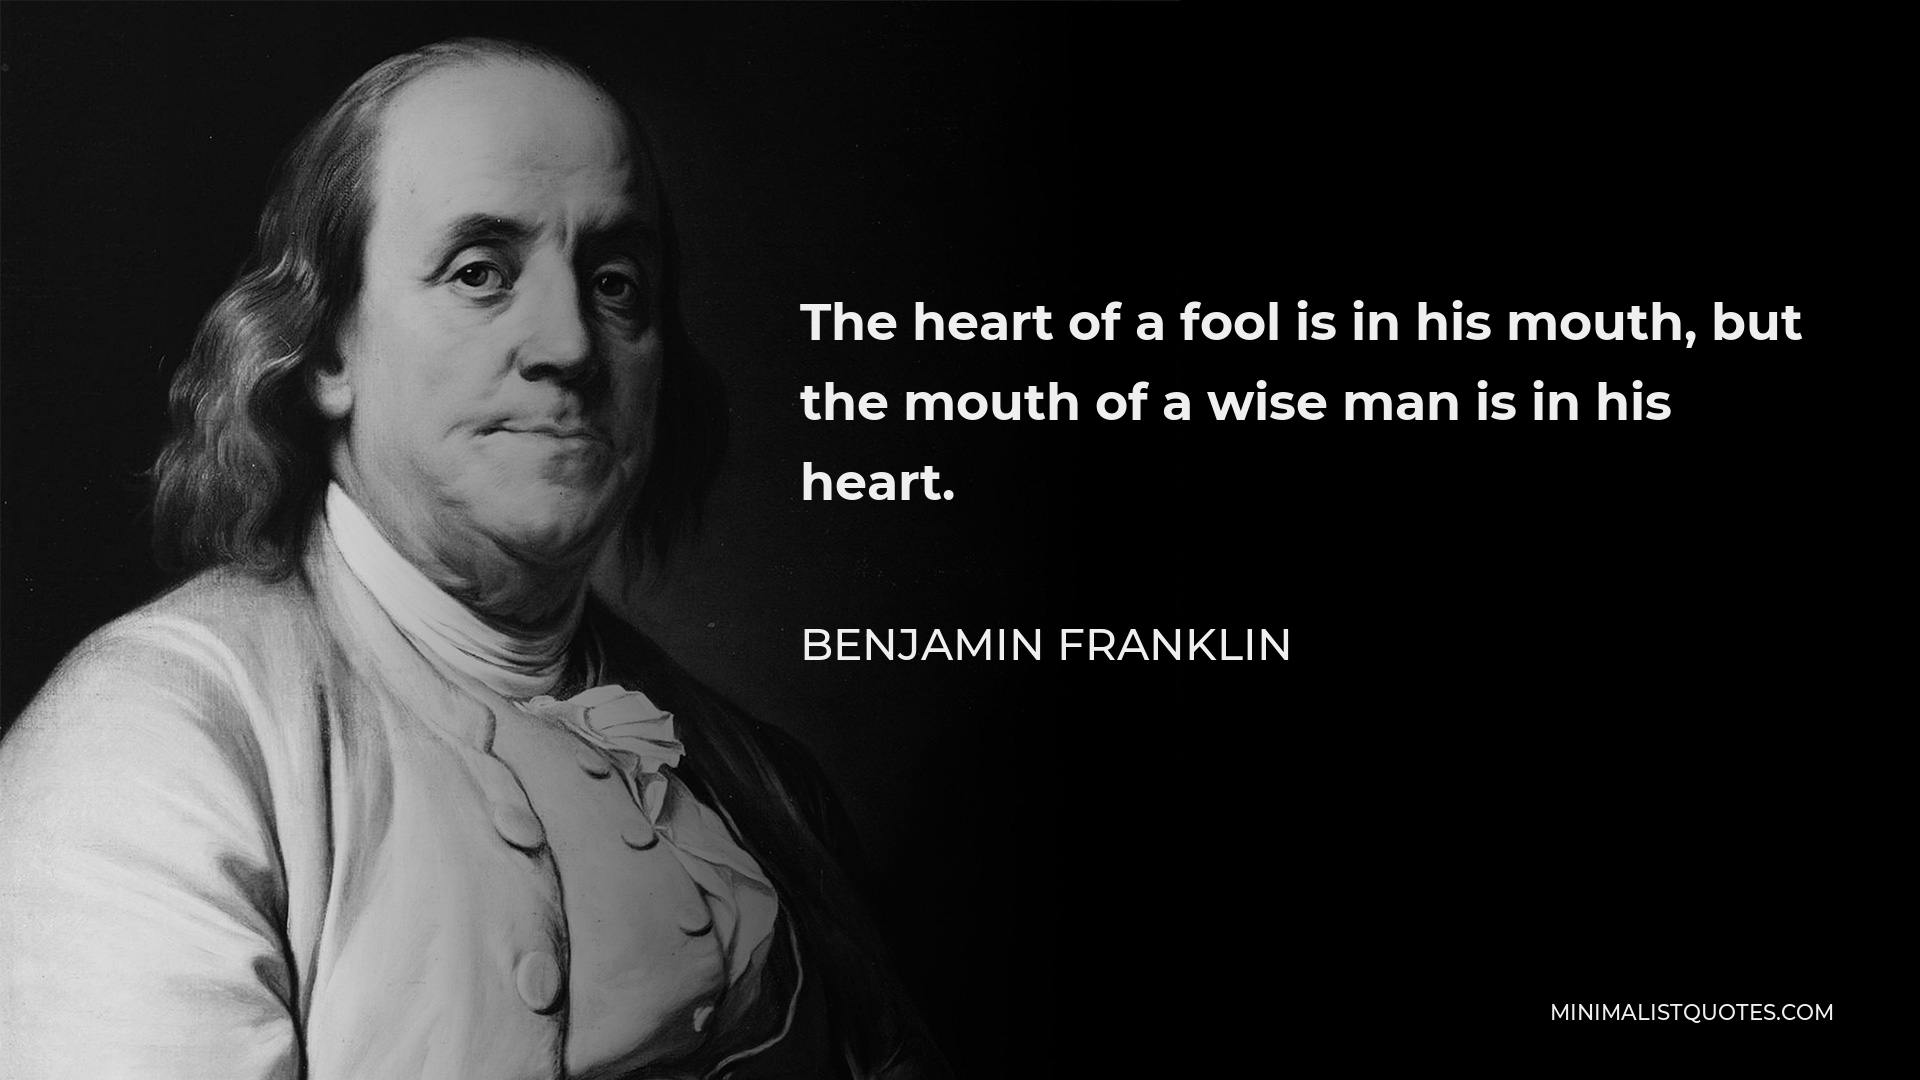 Benjamin Franklin Quote - The heart of a fool is in his mouth, but the mouth of a wise man is in his heart.